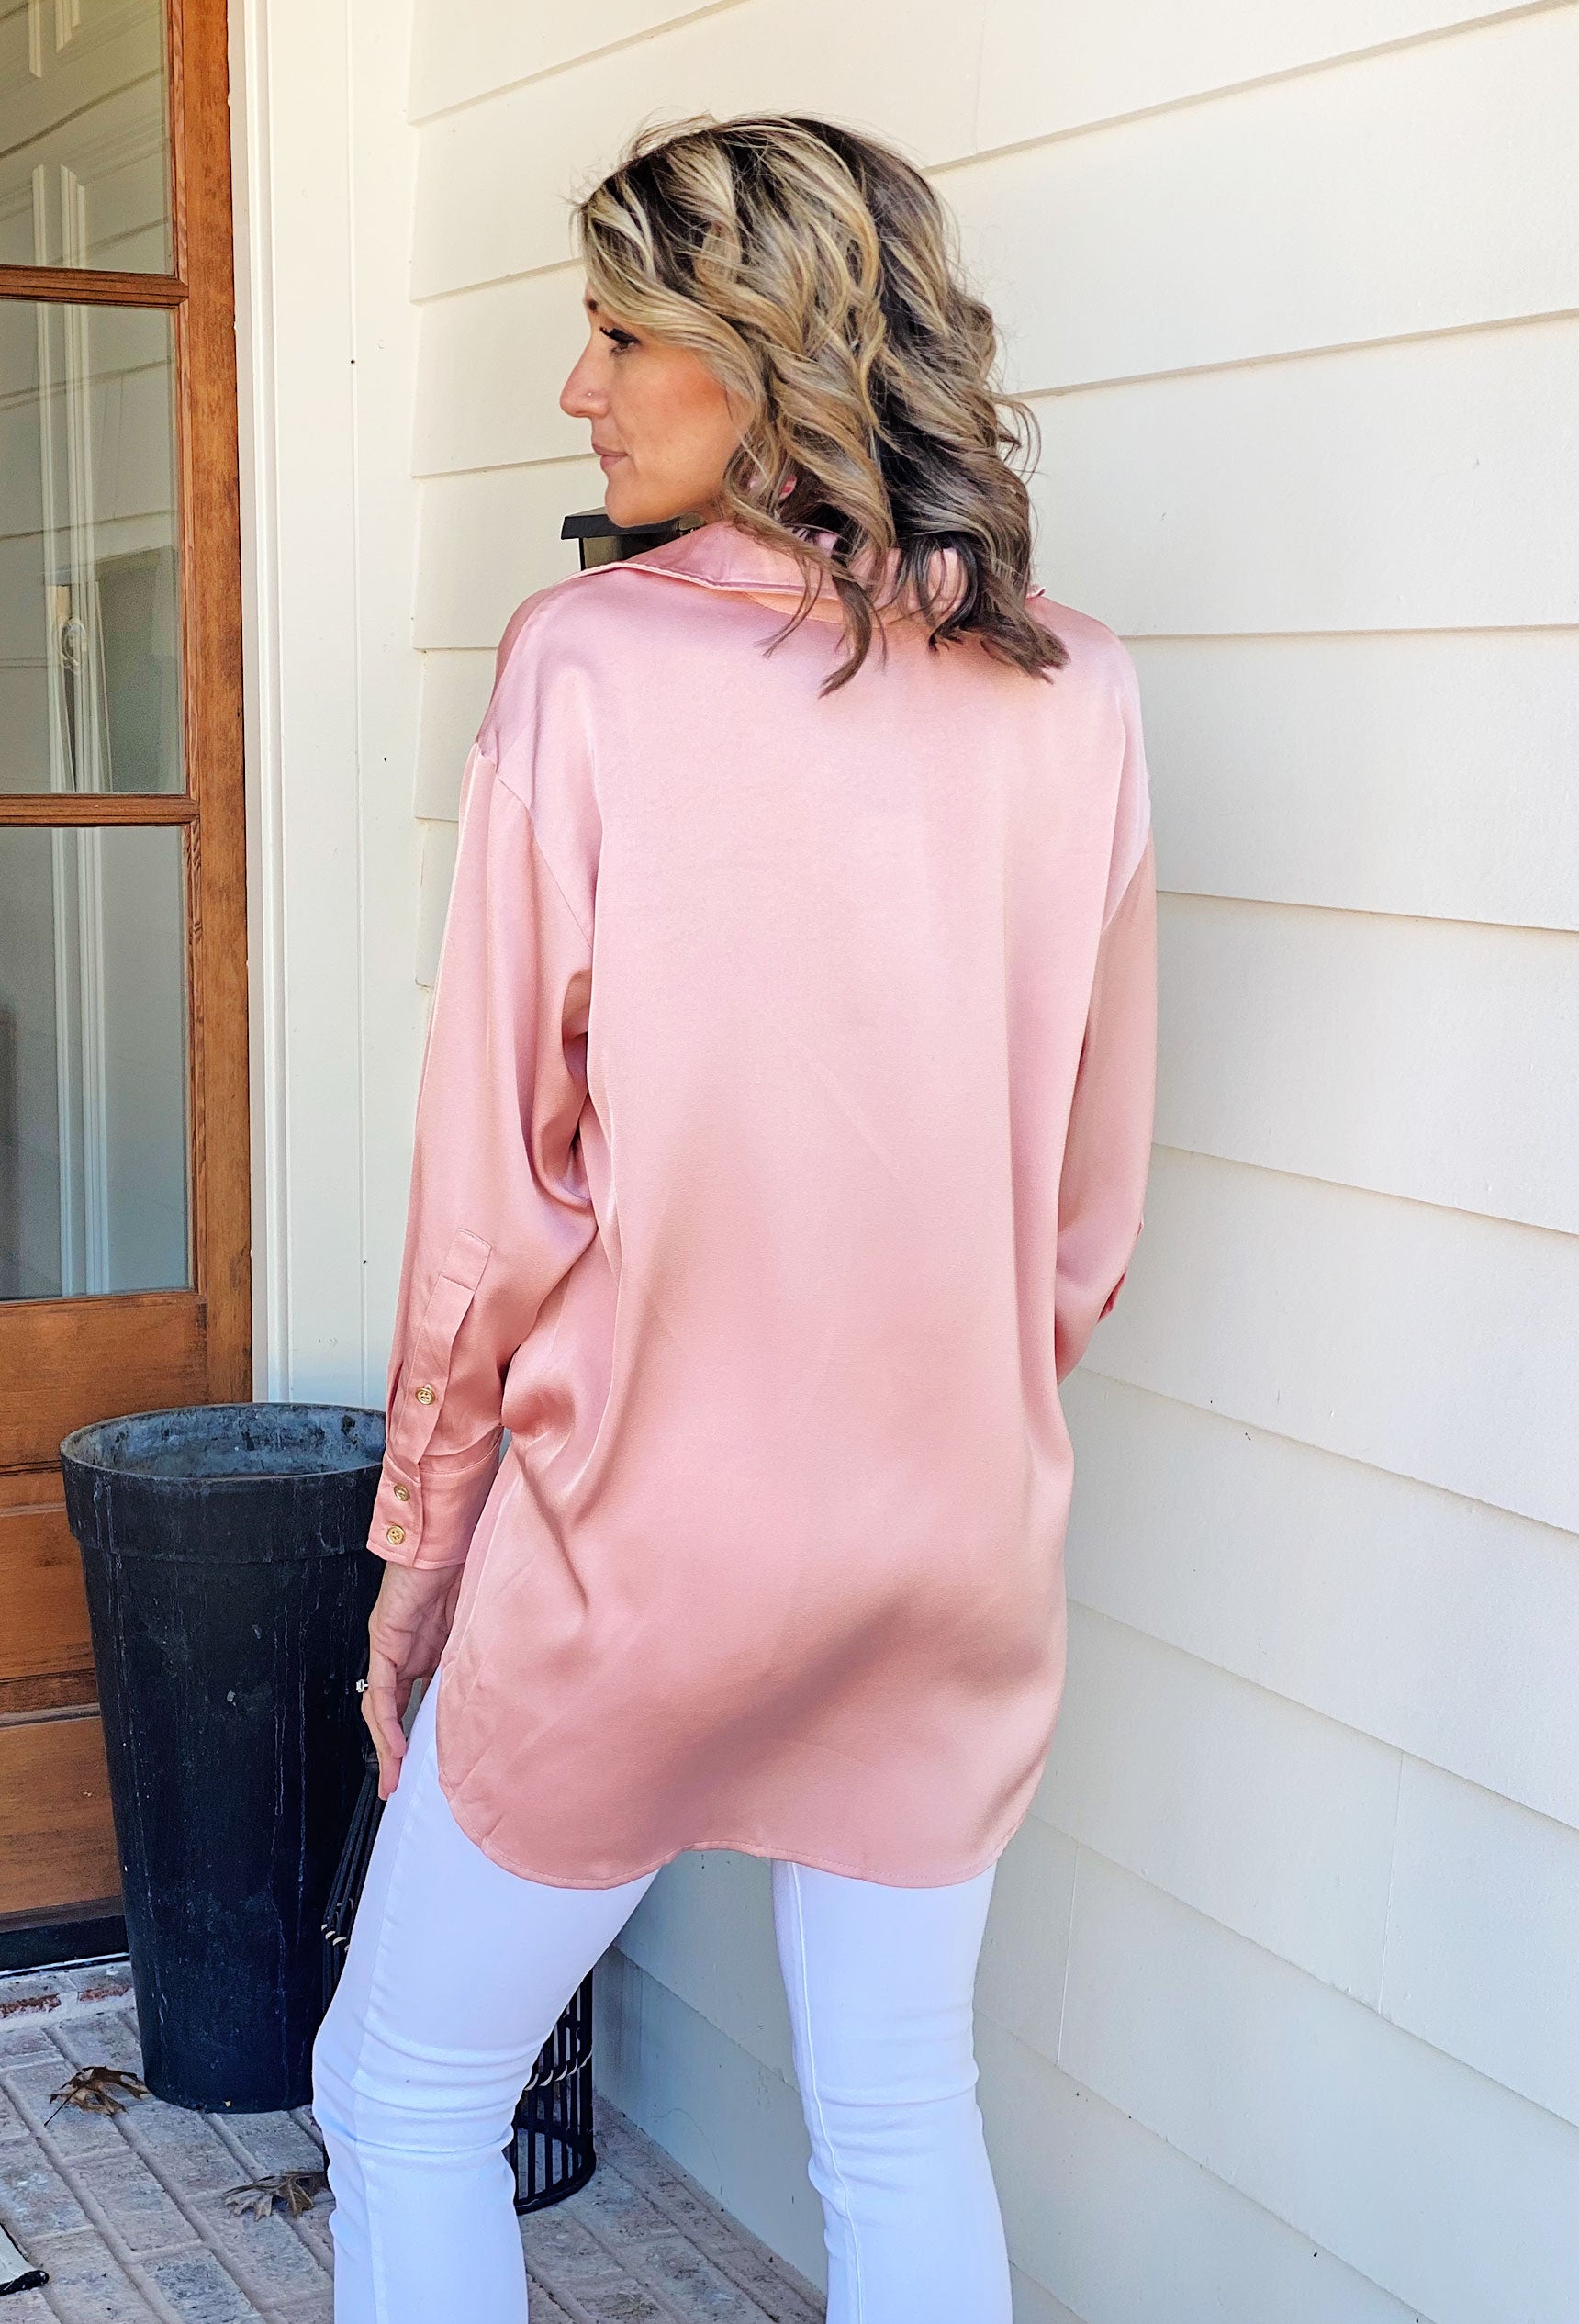 Aubrie Tunic Top in Peach, pink button up top, gold buttons